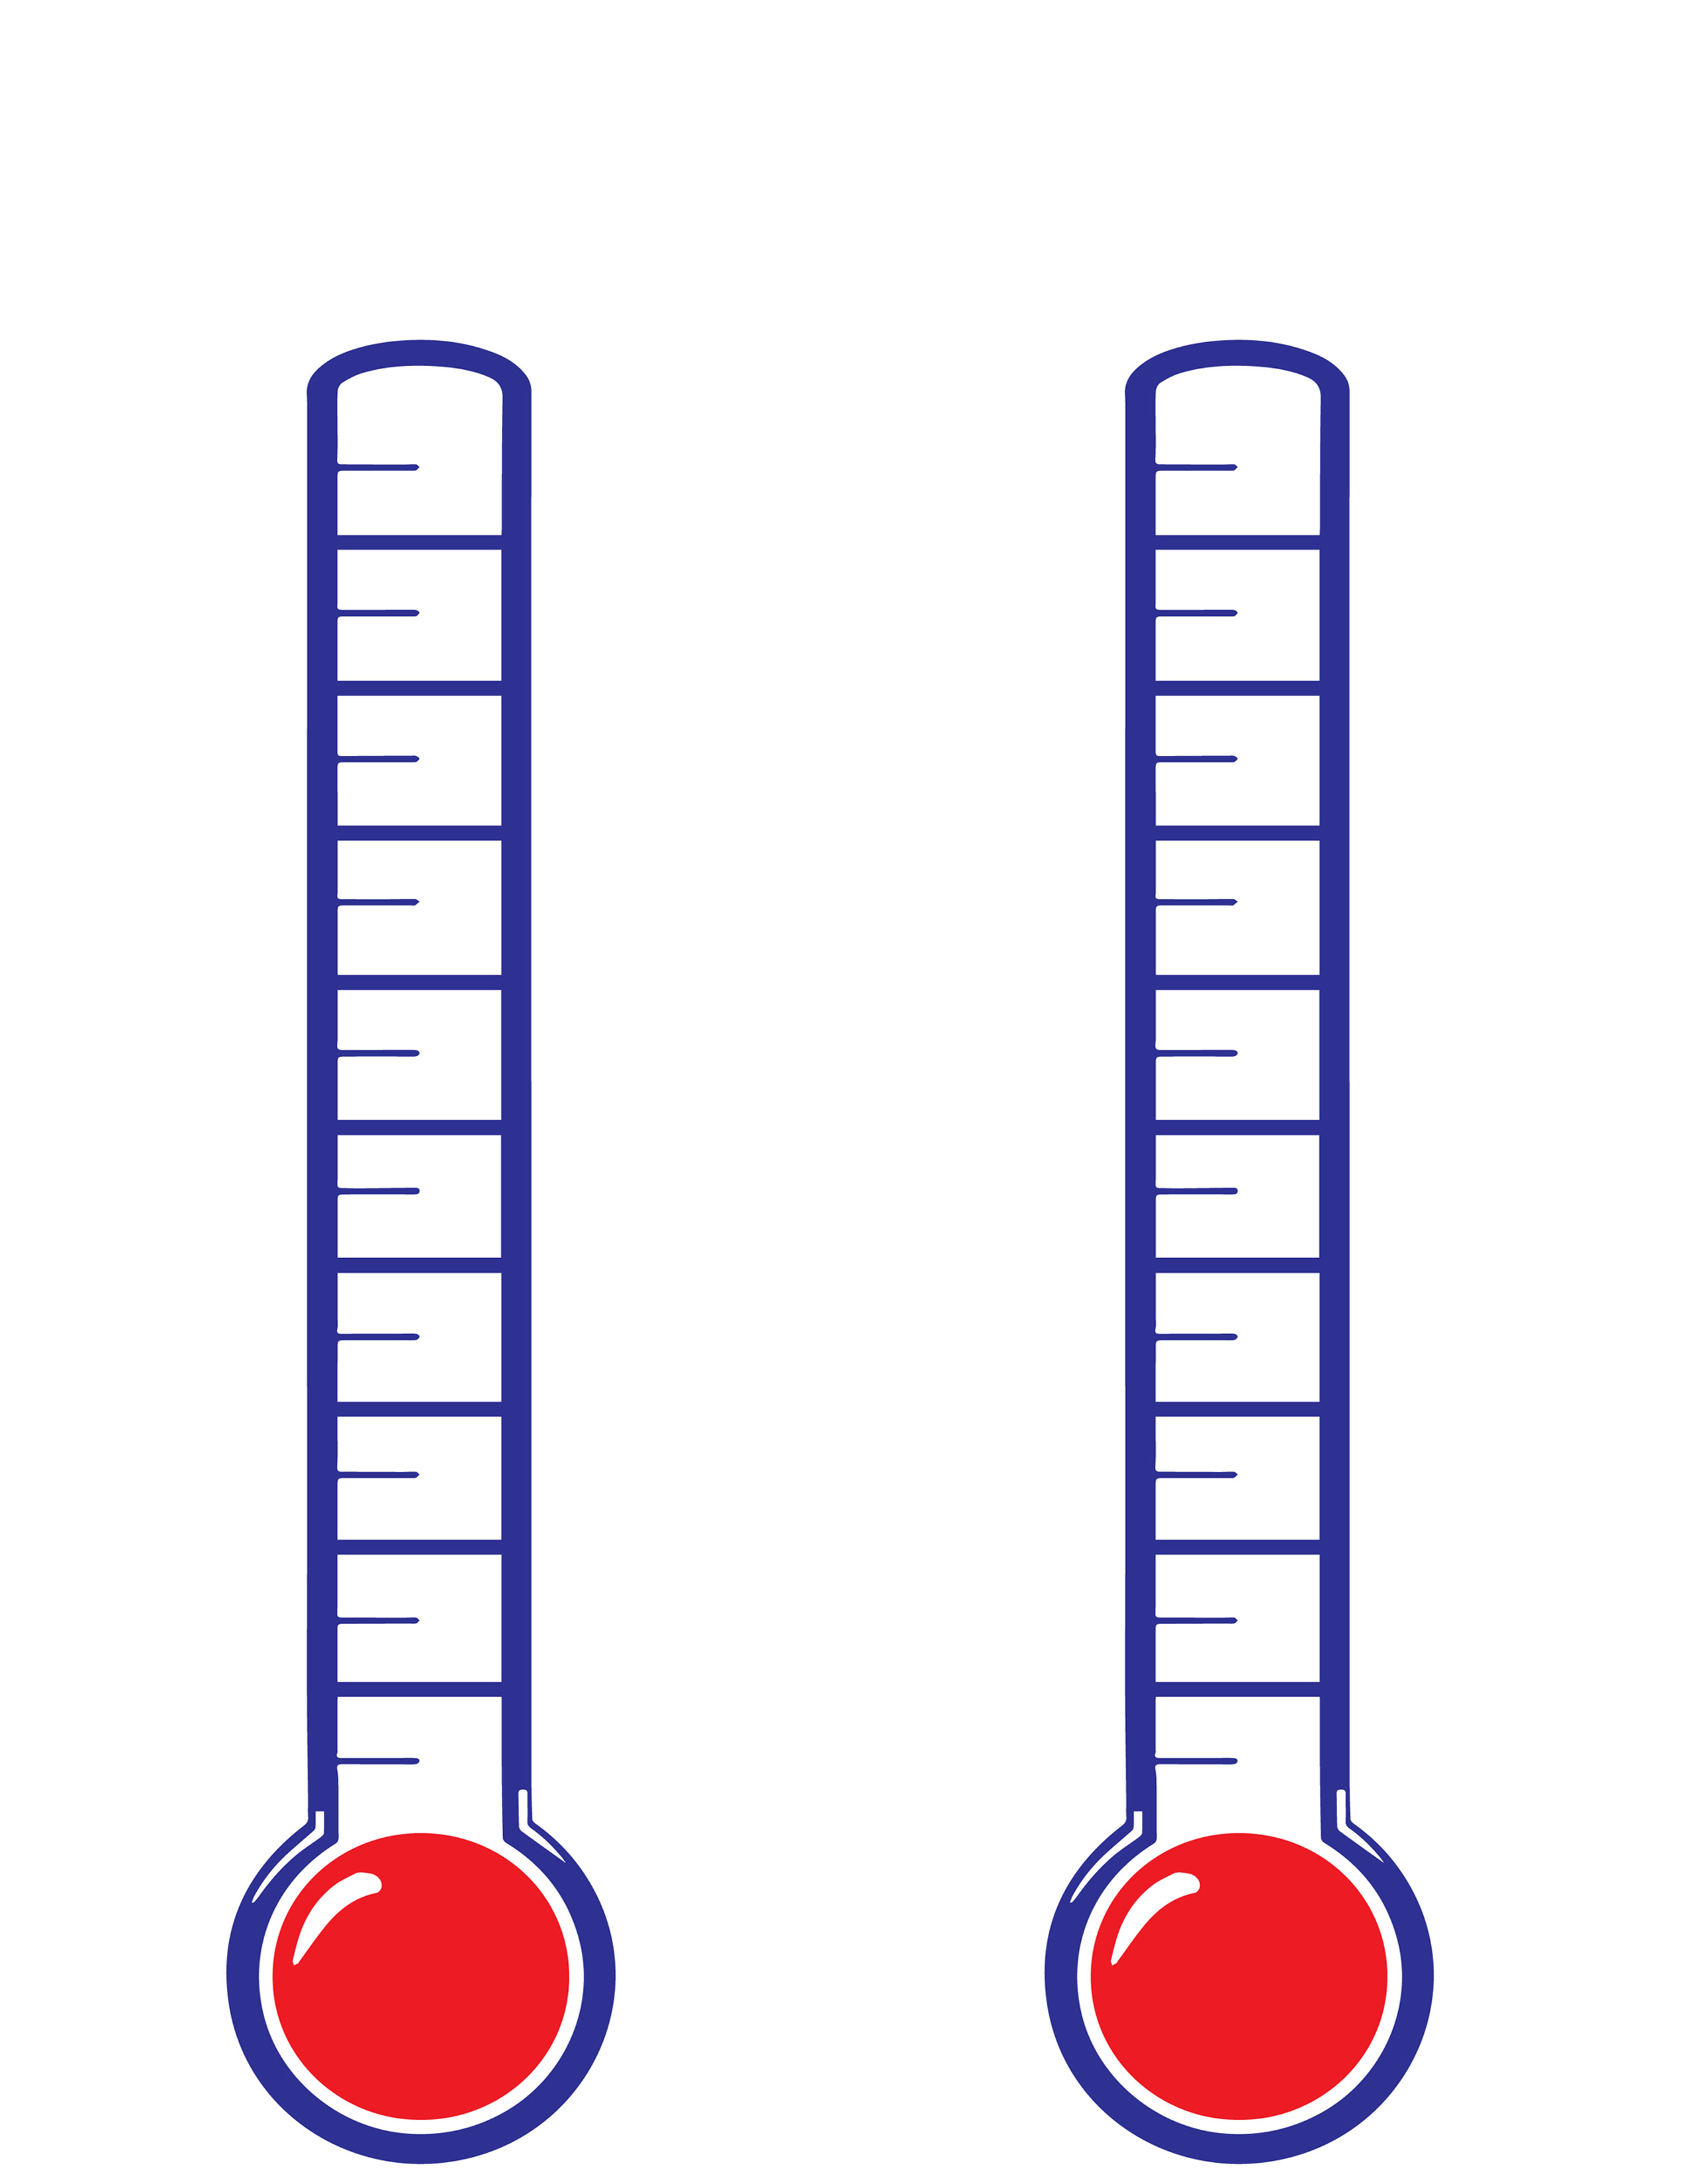 printable-goal-thermometer-customize-and-print